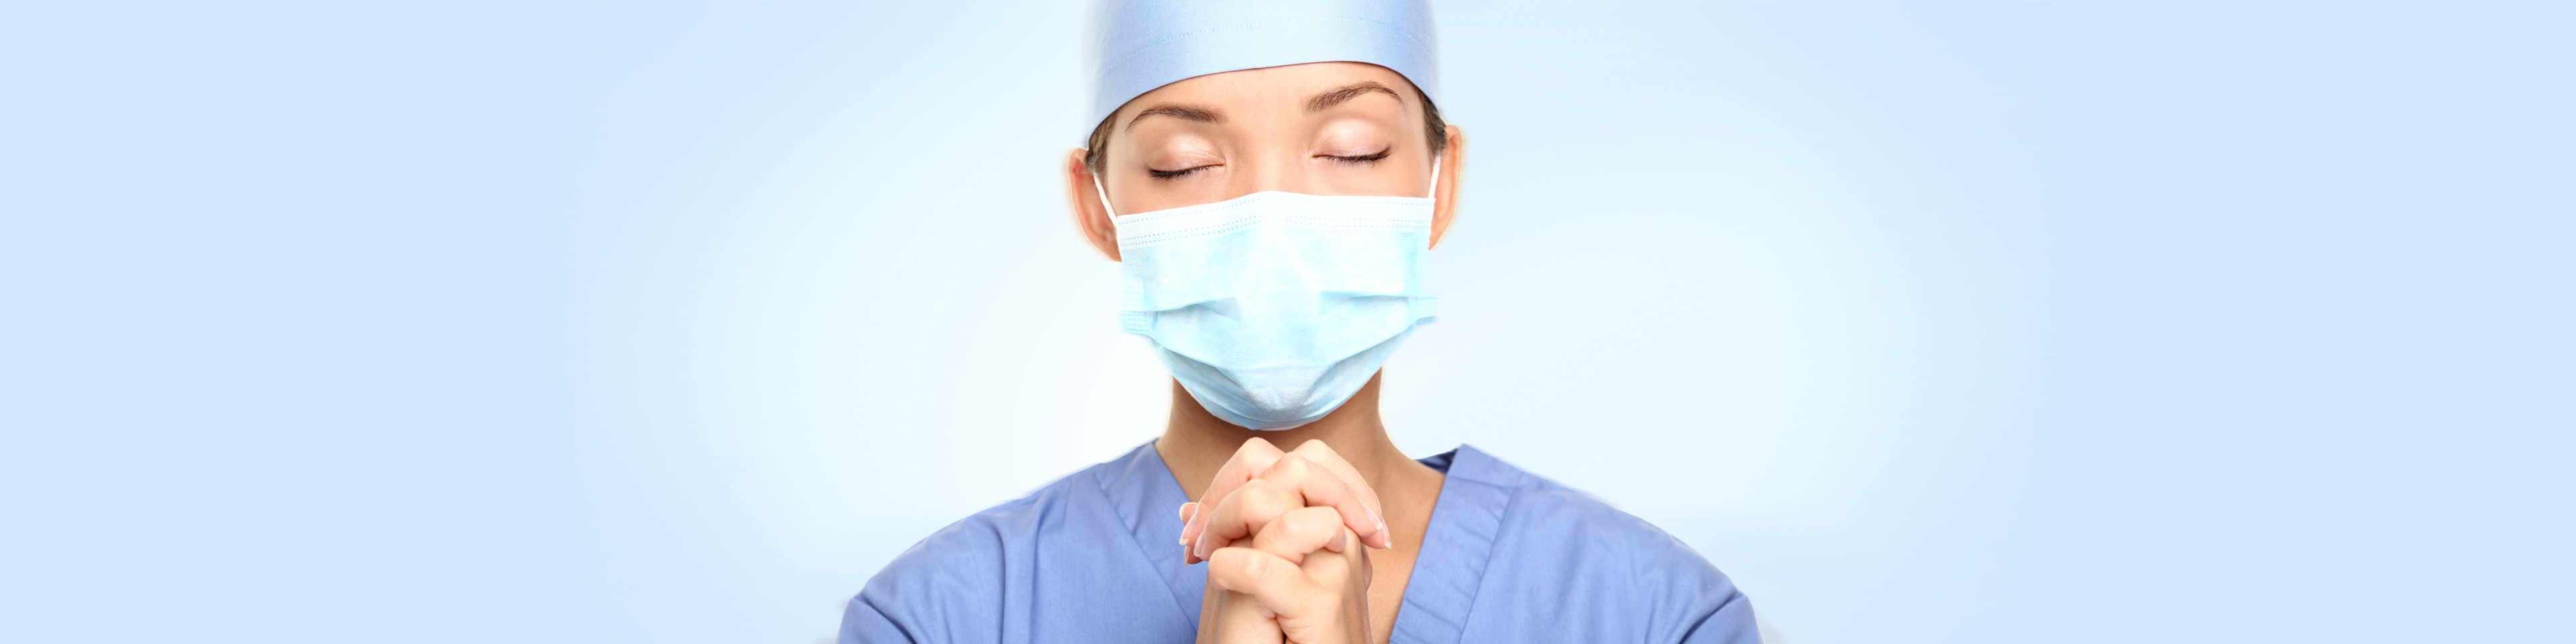 medical doctor with hands folded in prayer